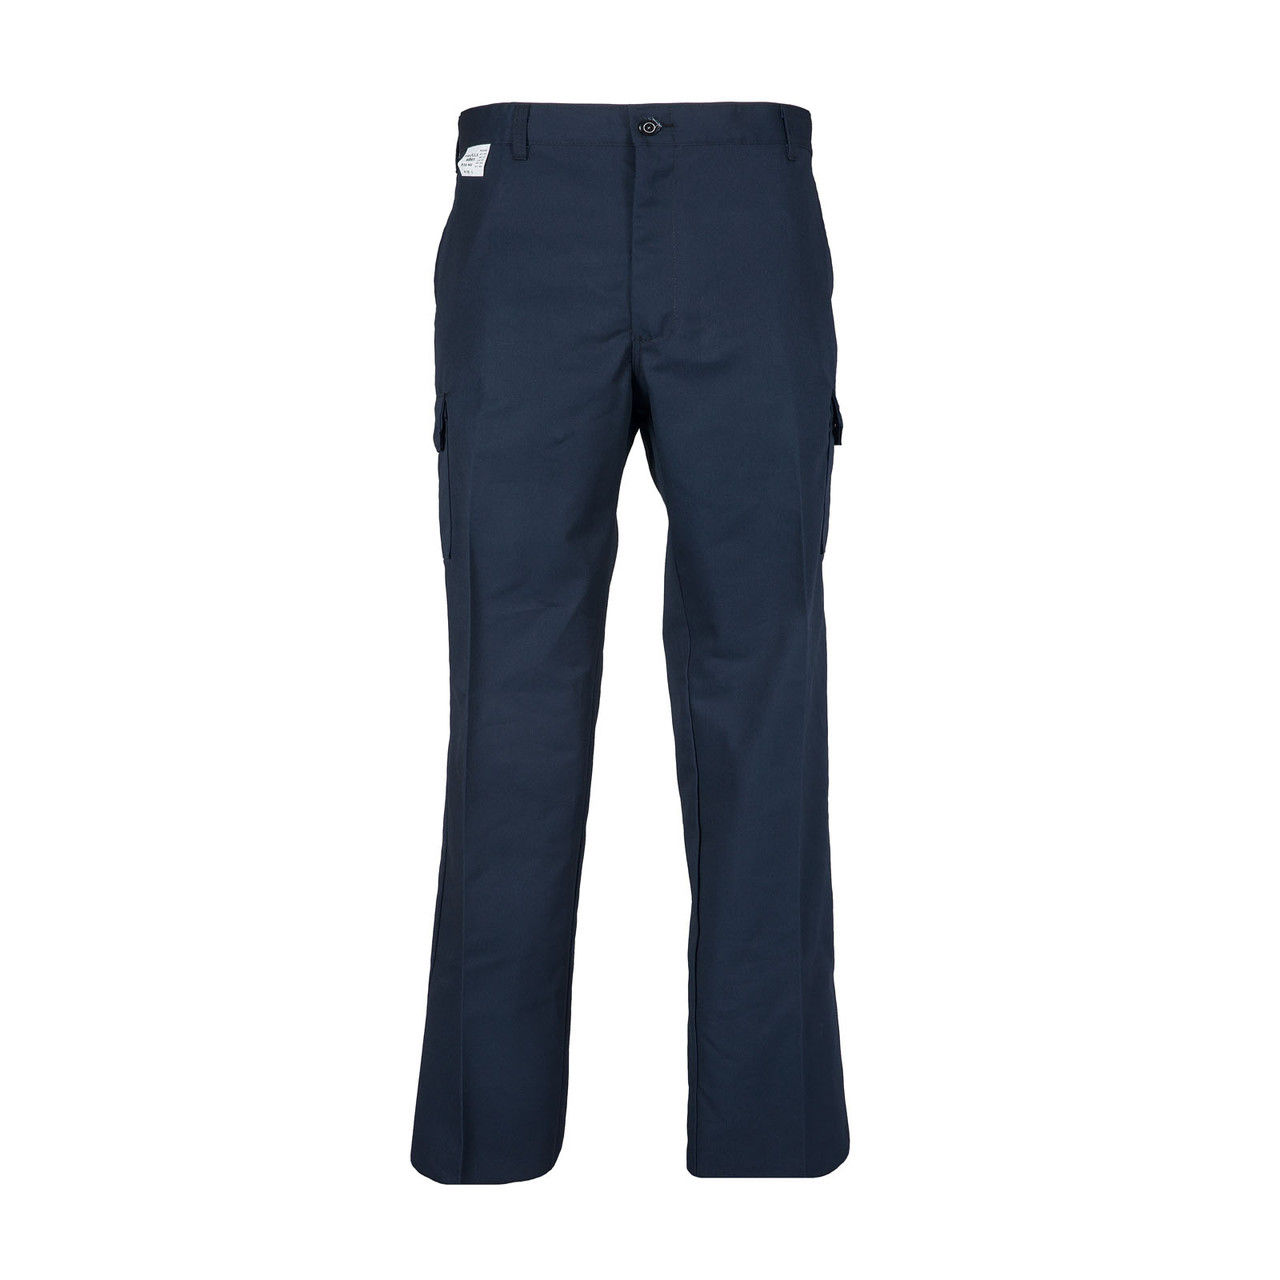 P24NV Men's Cargo Industrial Work Pant, Navy Blue Questions & Answers